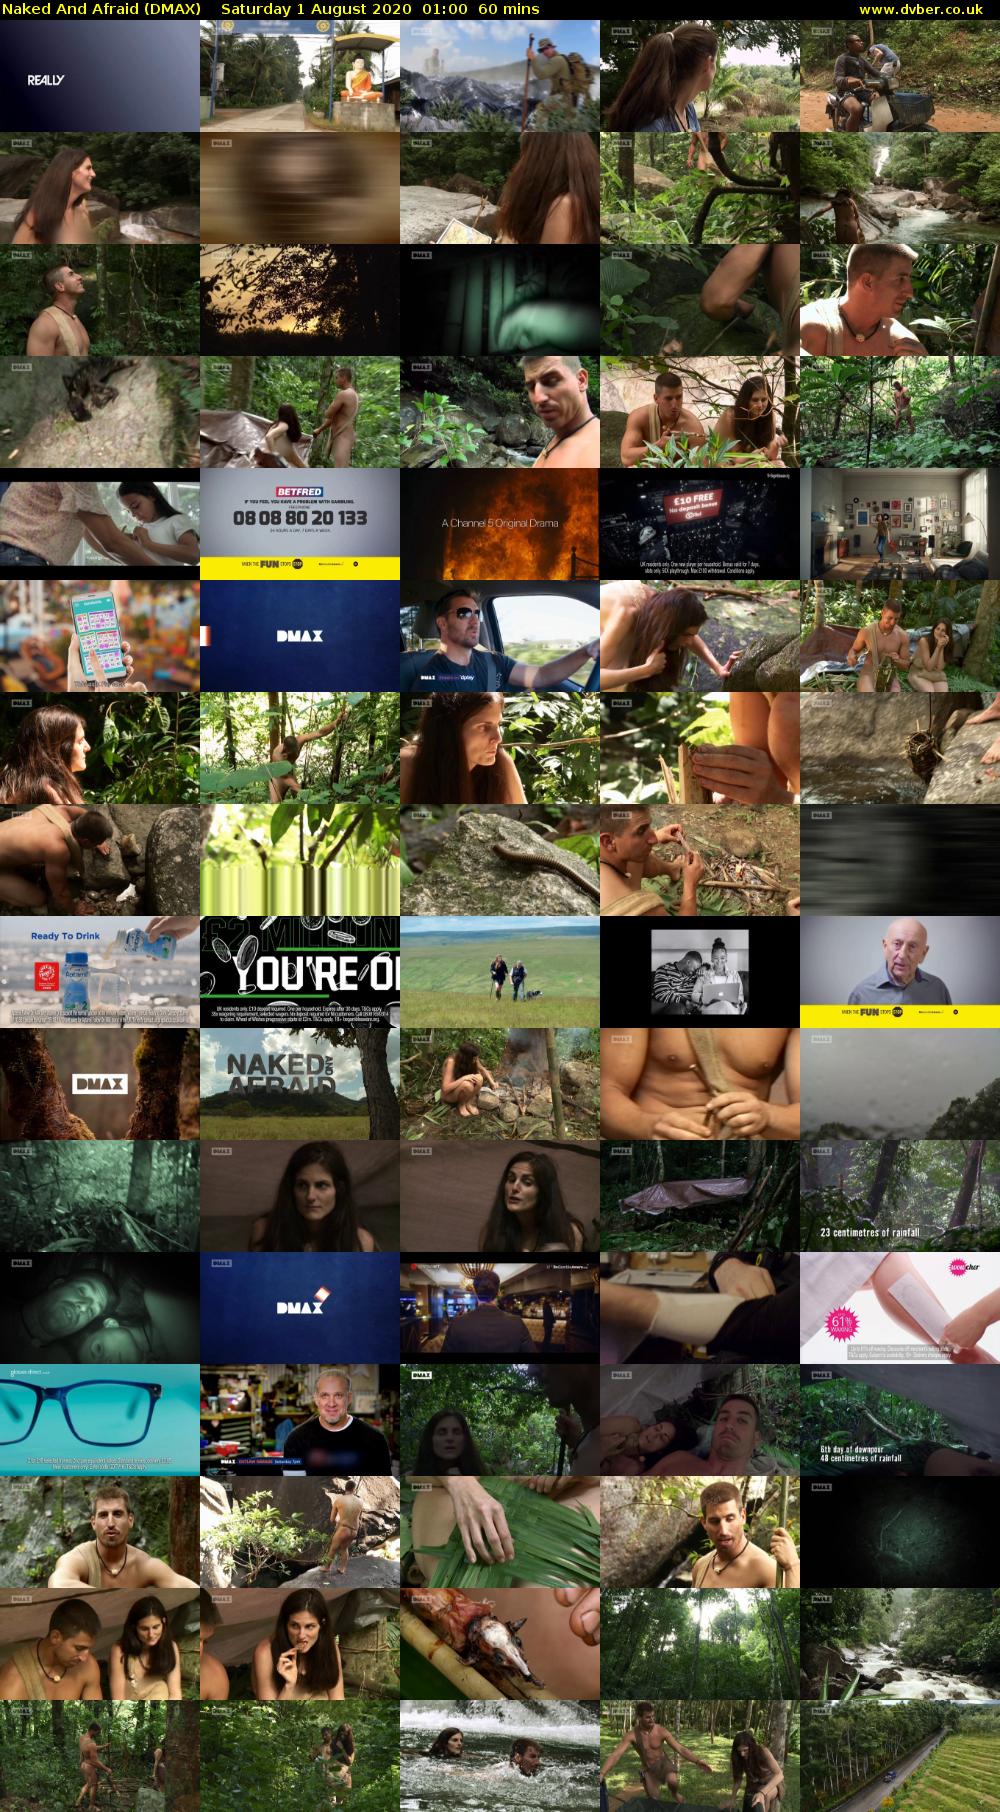 Naked And Afraid (DMAX) Saturday 1 August 2020 01:00 - 02:00